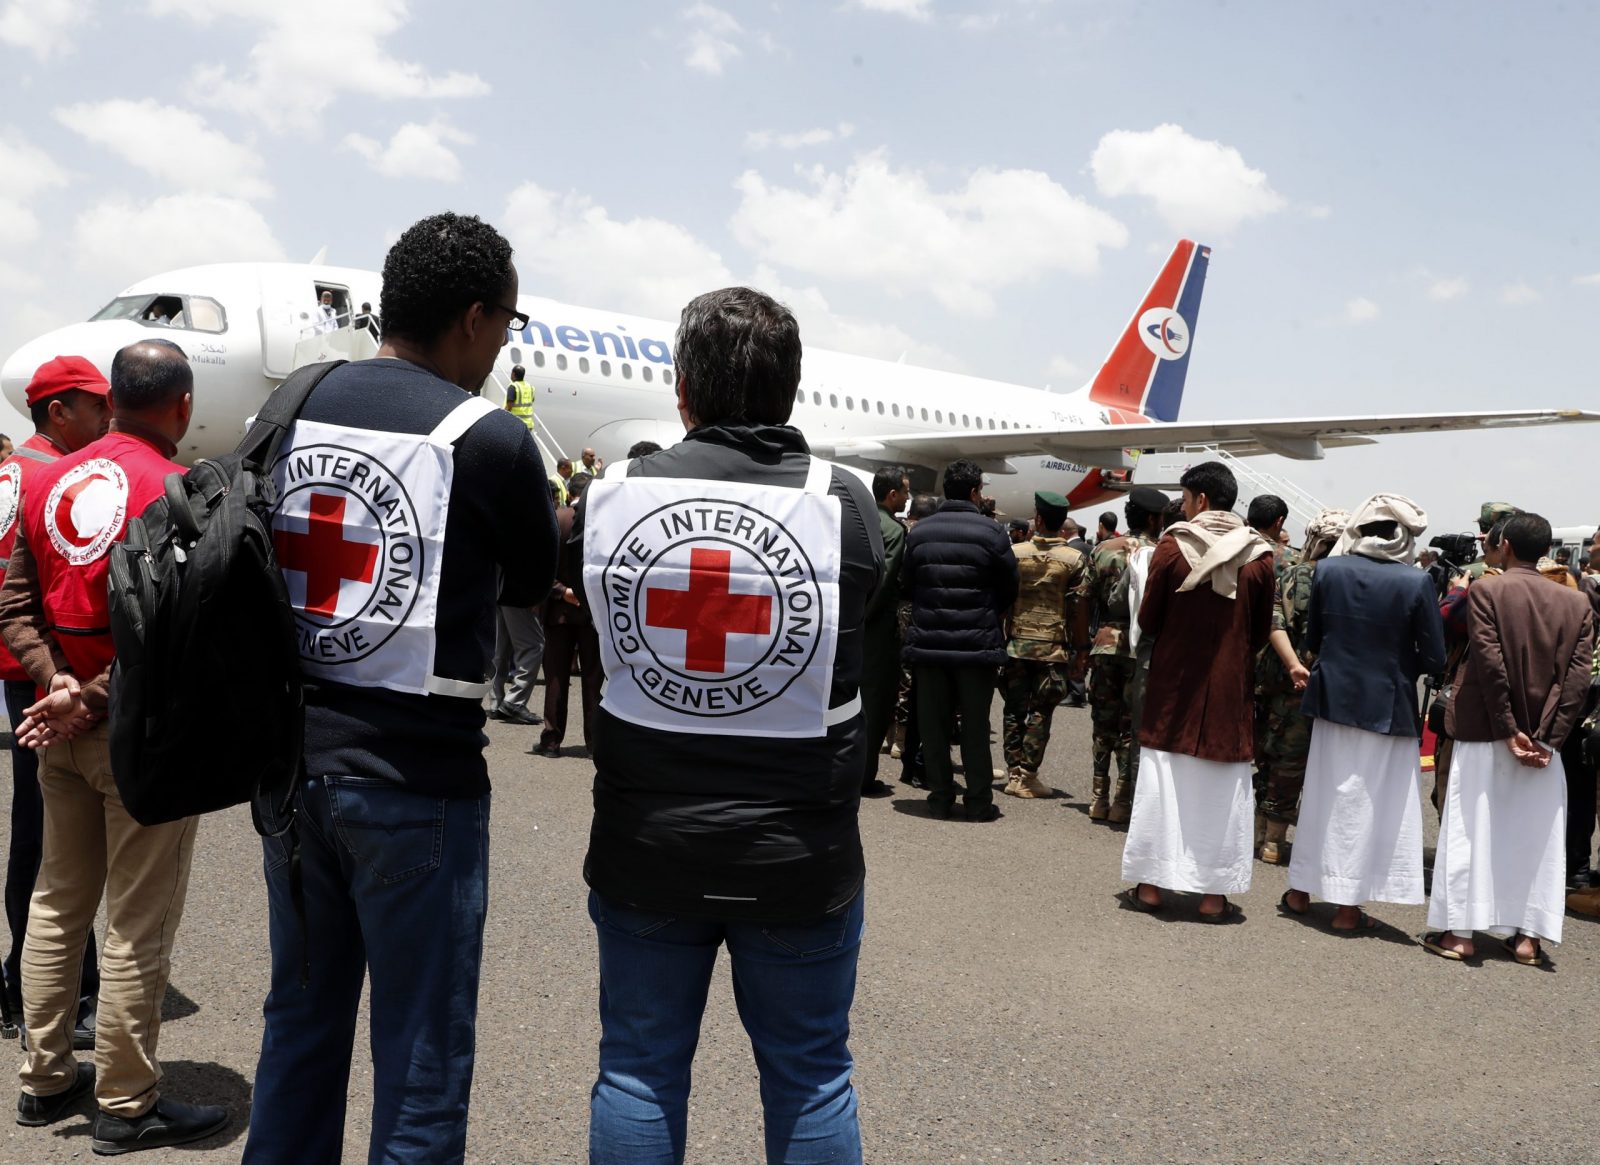 epa10572345 ICRC members stand near a plane carrying freed prisoners loyal to Houthis upon their arrival at Sanaa Airport, on the first day of a prisoner swap, in Sana'a, Yemen, 14 April 2023. According to the International Committee of the Red Cross (ICRC), Yemen's warring parties began on 14 April a three-day exchange of 887 prisoners. The Houthis have agreed to release 181 detainees, including Saudis and Sudanese soldiers who fought alongside Yemeni government forces, in exchange for 706 prisoners held by the Yemeni government, under the UN and ICRC-brokered prisoner swap deal reached last March in Switzerland.  EPA/YAHYA ARHAB